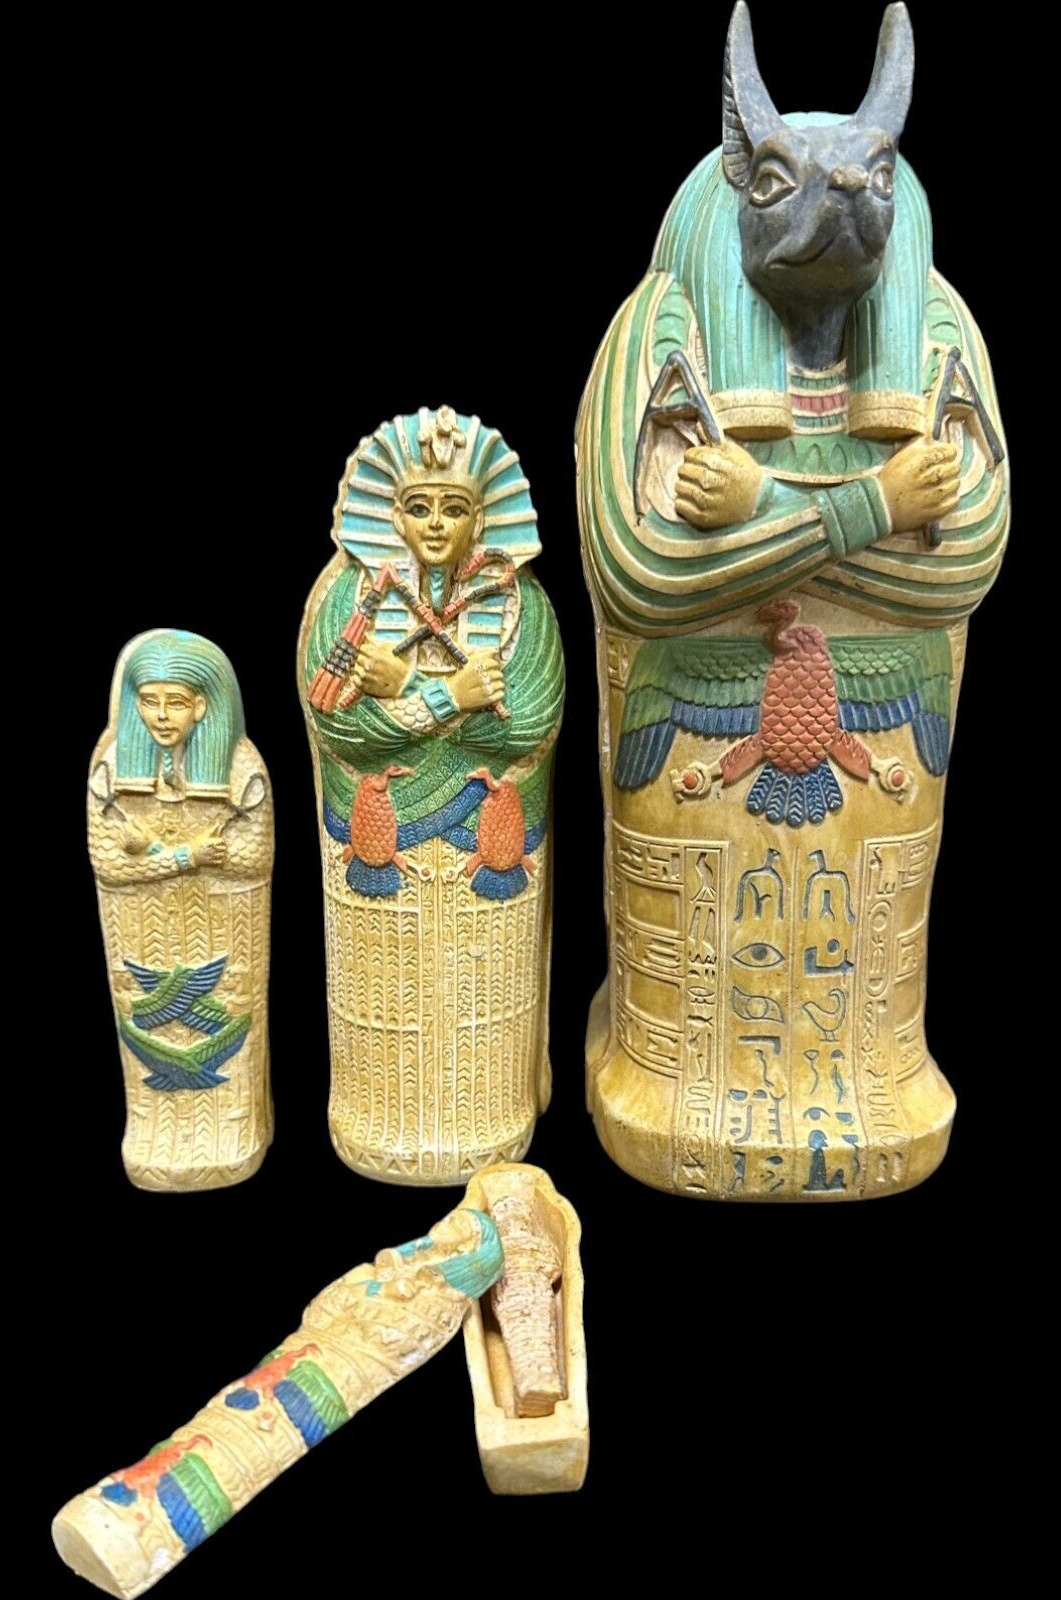 RARE ANCIENT EGYPTIAN ANTIQUES Coffin With Head God Anubis and 4 Pharaonic Mummy